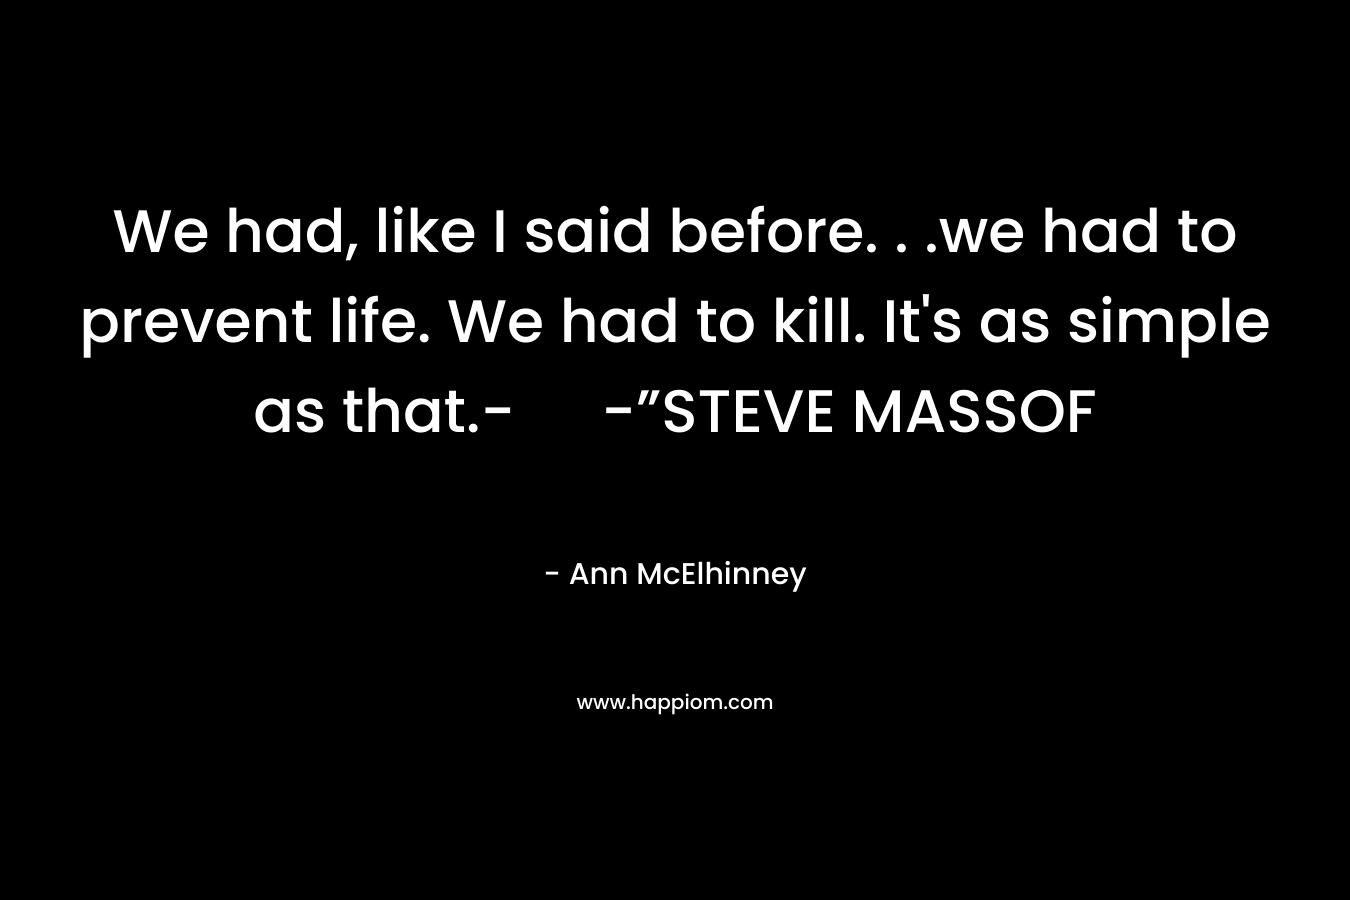 We had, like I said before. . .we had to prevent life. We had to kill. It's as simple as that.- -”STEVE MASSOF